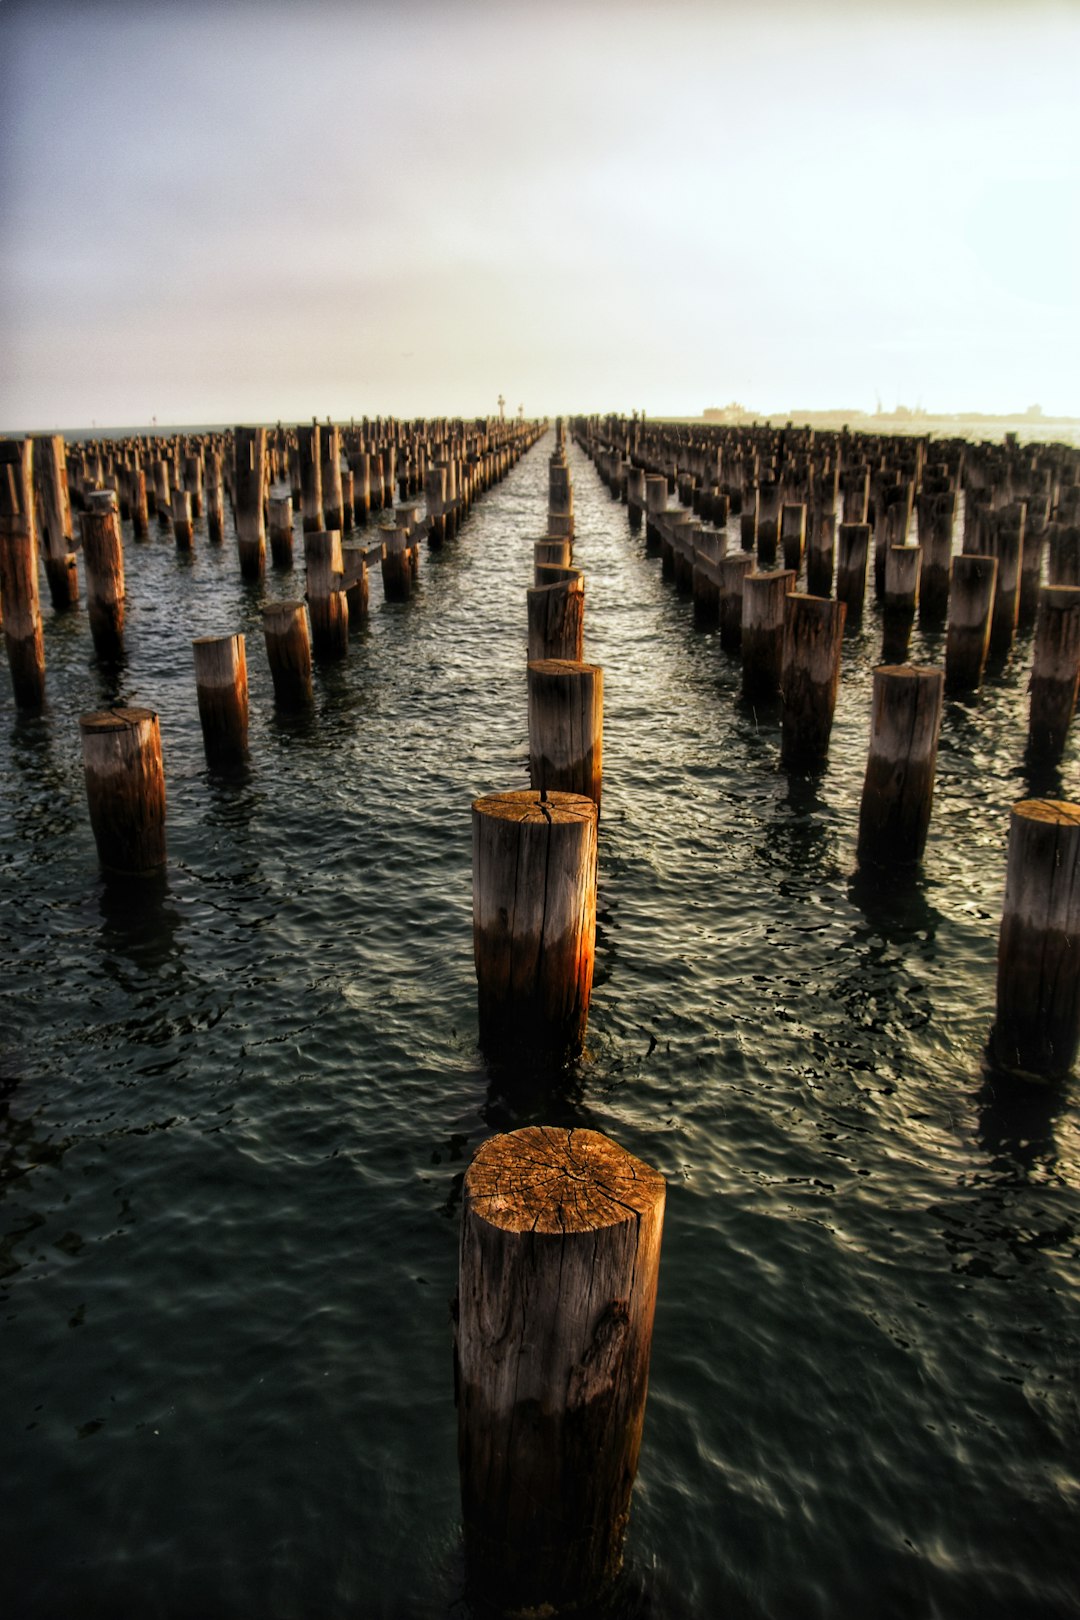 Travel Tips and Stories of Princes Pier in Australia